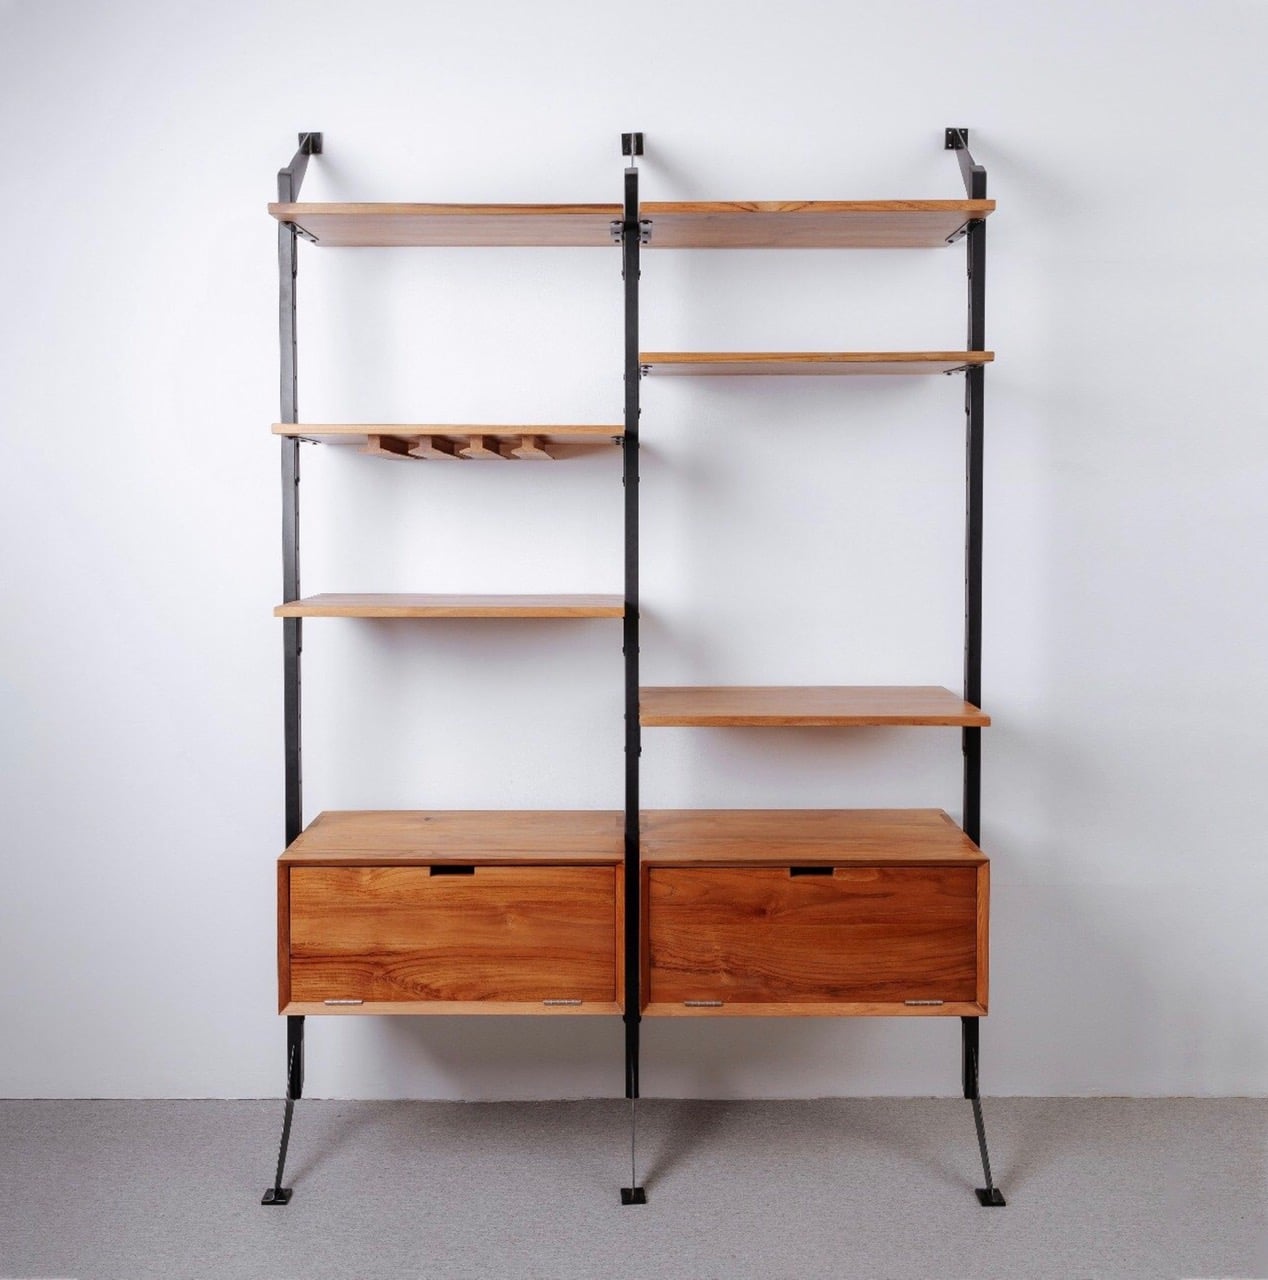 Made to Order Furniture. - Book Cases 034-01